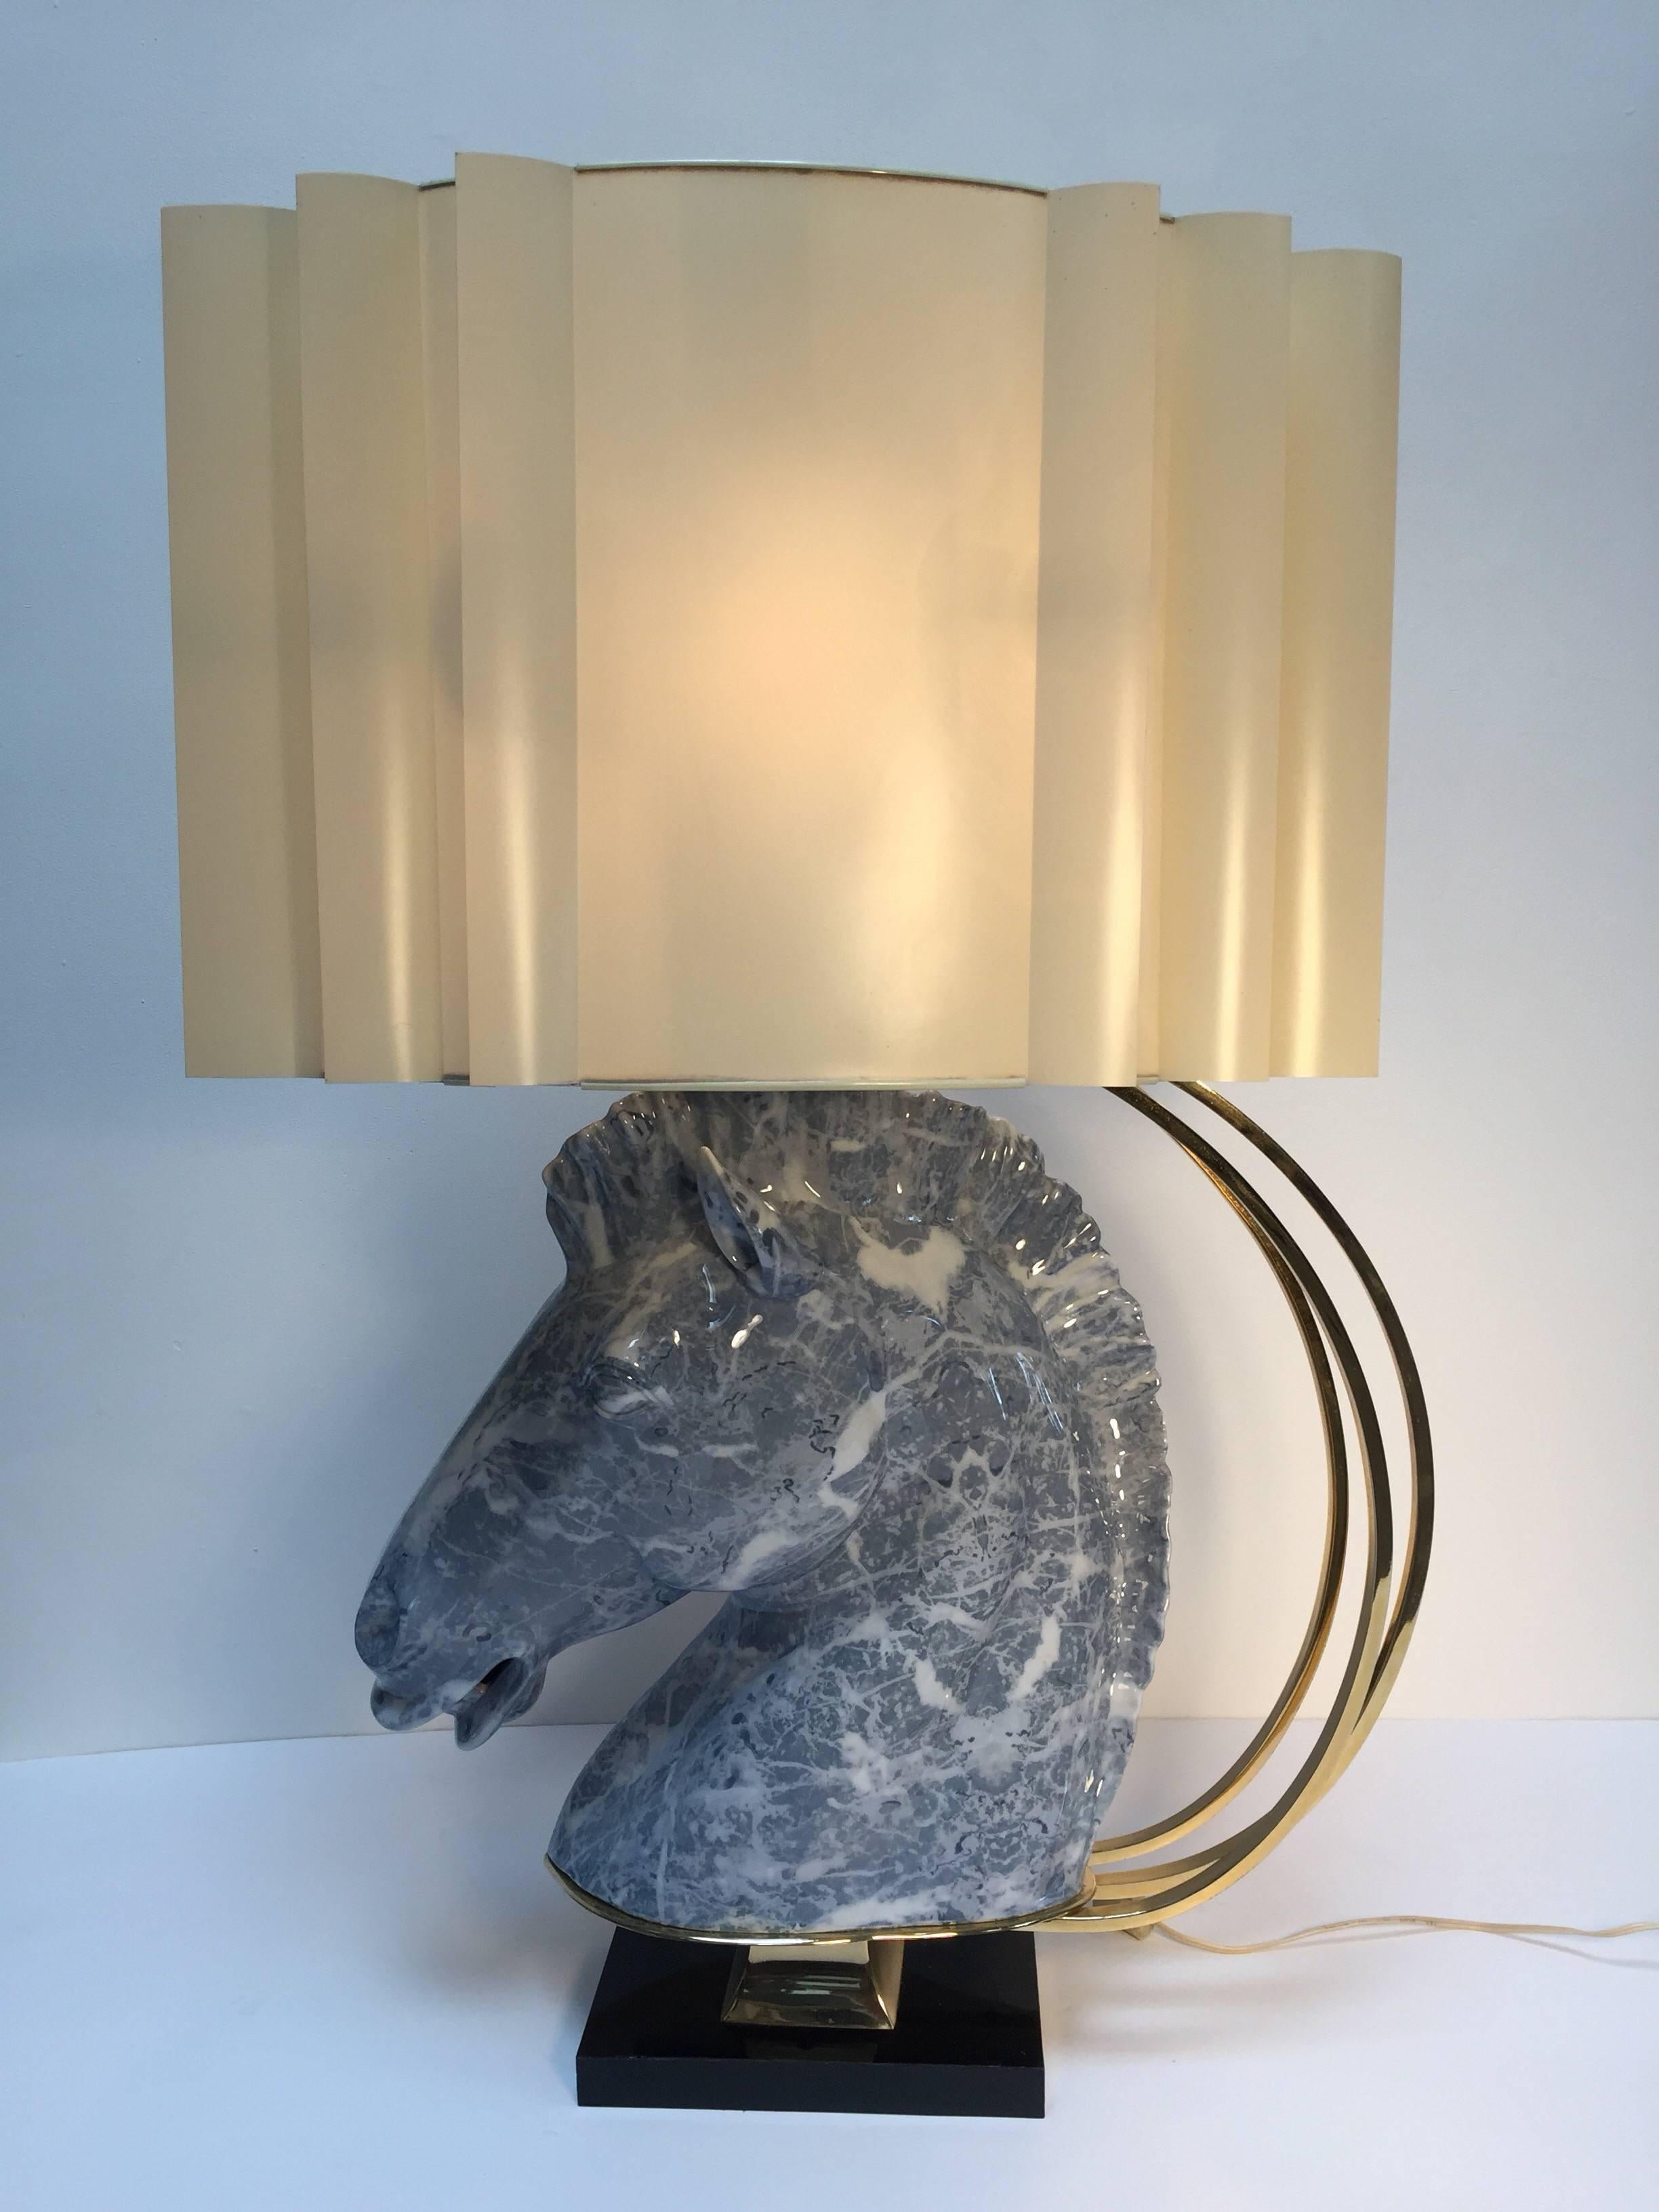 Ceramic sculptural Art Deco horse Bust, supported on brass stand on a black base, with brass double light fitting supporting an original custom shade.
A Maison Jansen style lamp ceramic horse head bust marbled in white and blue color.
Spectacular